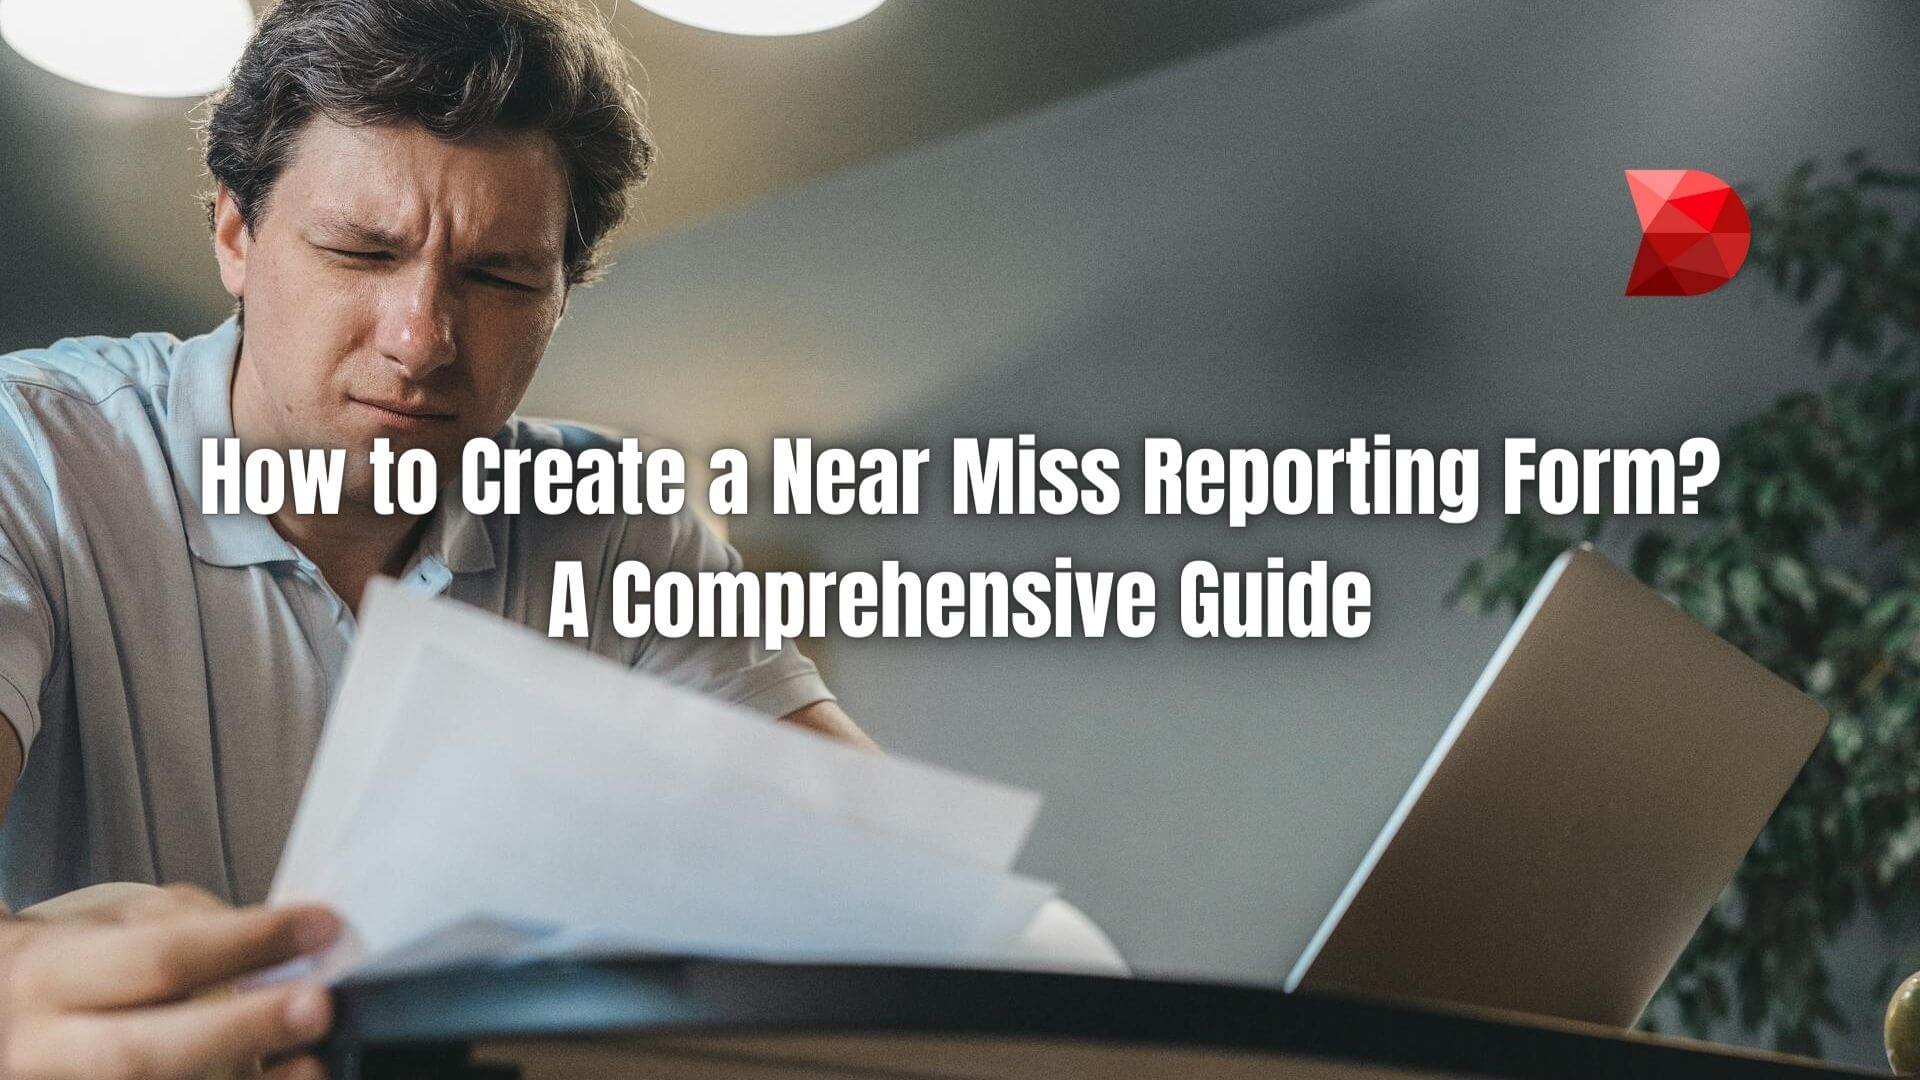 Master the art of crafting effective near miss reporting forms with our guide. Learn the essentials for safety and incident prevention today!